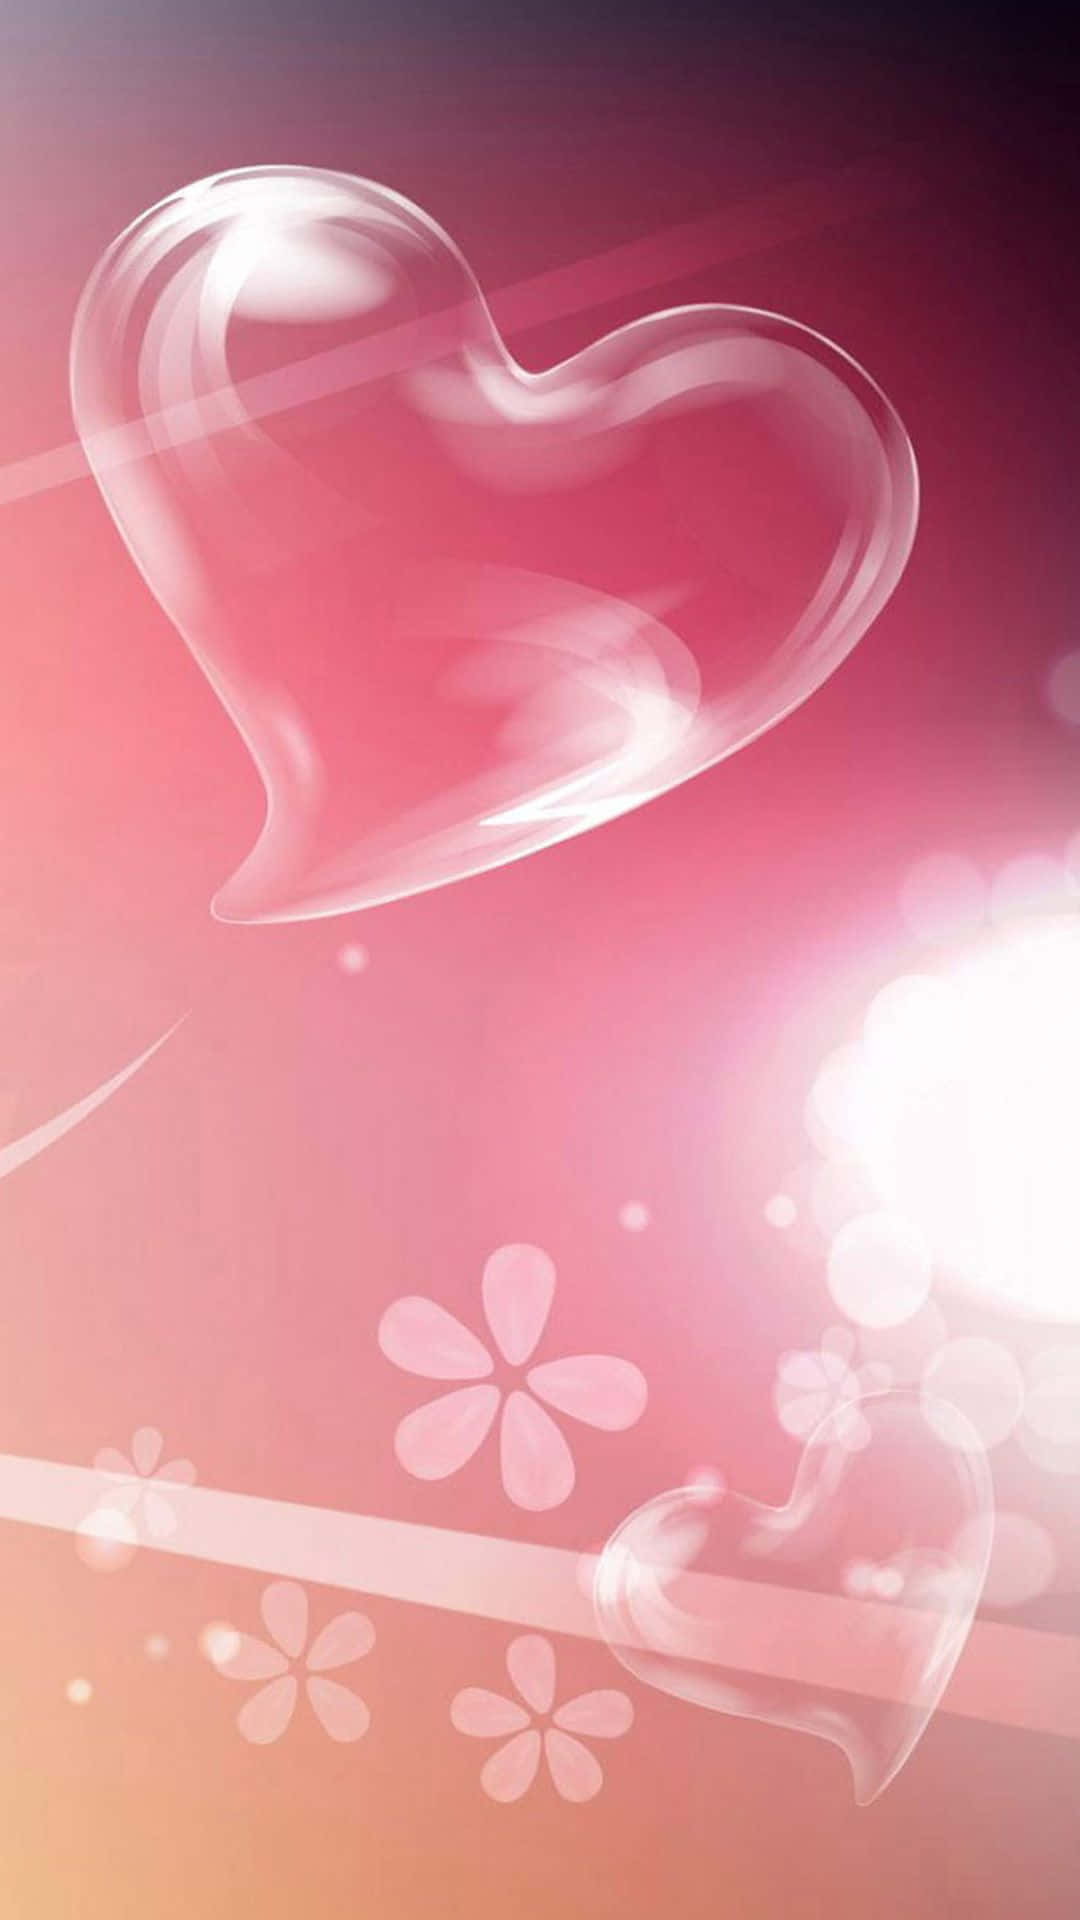 Floating Flowers And Pink Heart Iphone Wallpaper